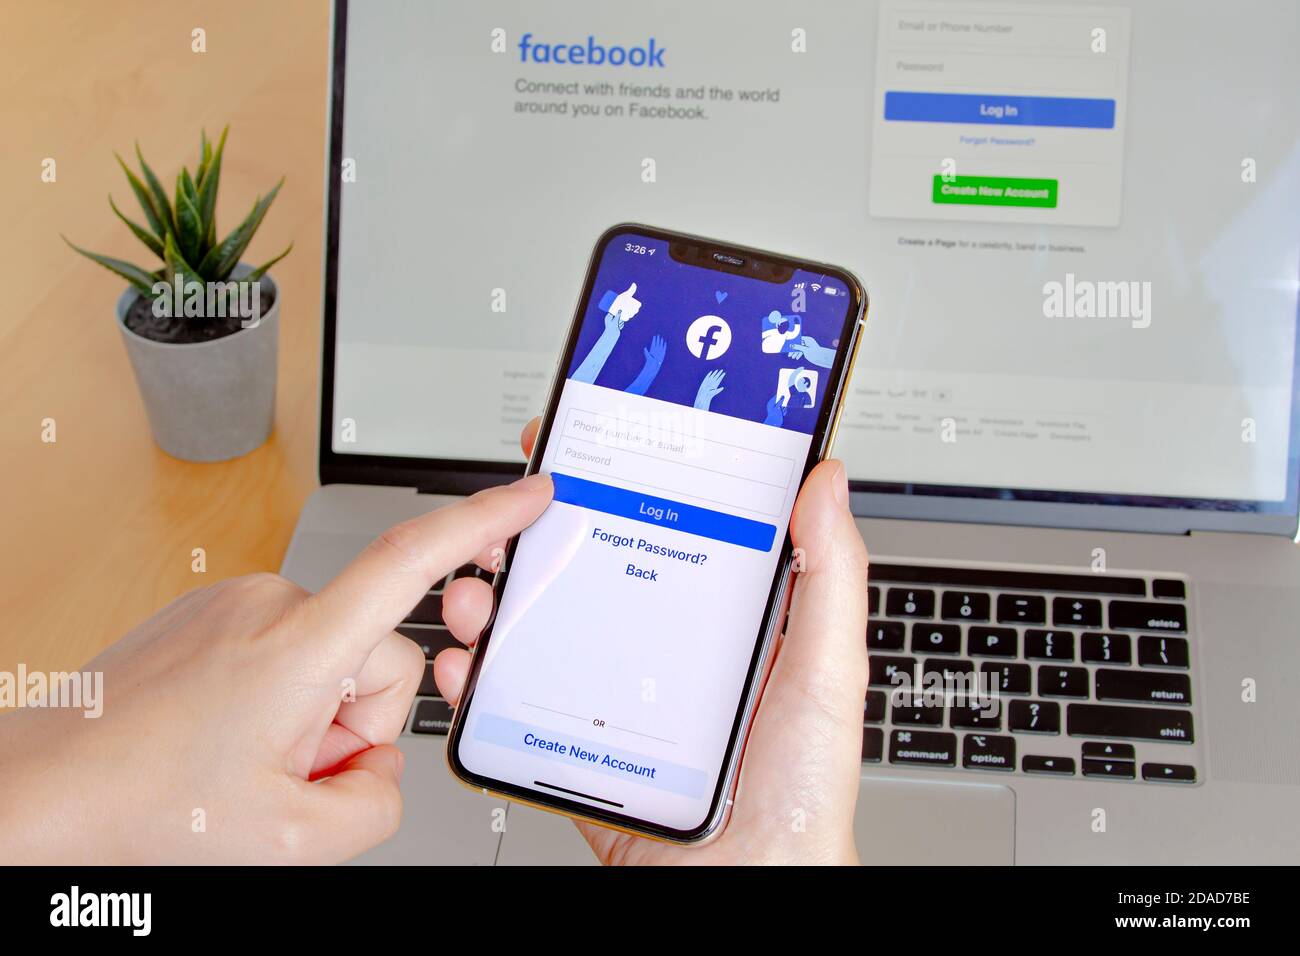 Calgary, Alberta. Canada. Nov 11 2020: A close up of a person using Facebook app on an iPhone Pro 12 and Macbook Pro on a wooden table with a plant. Stock Photo